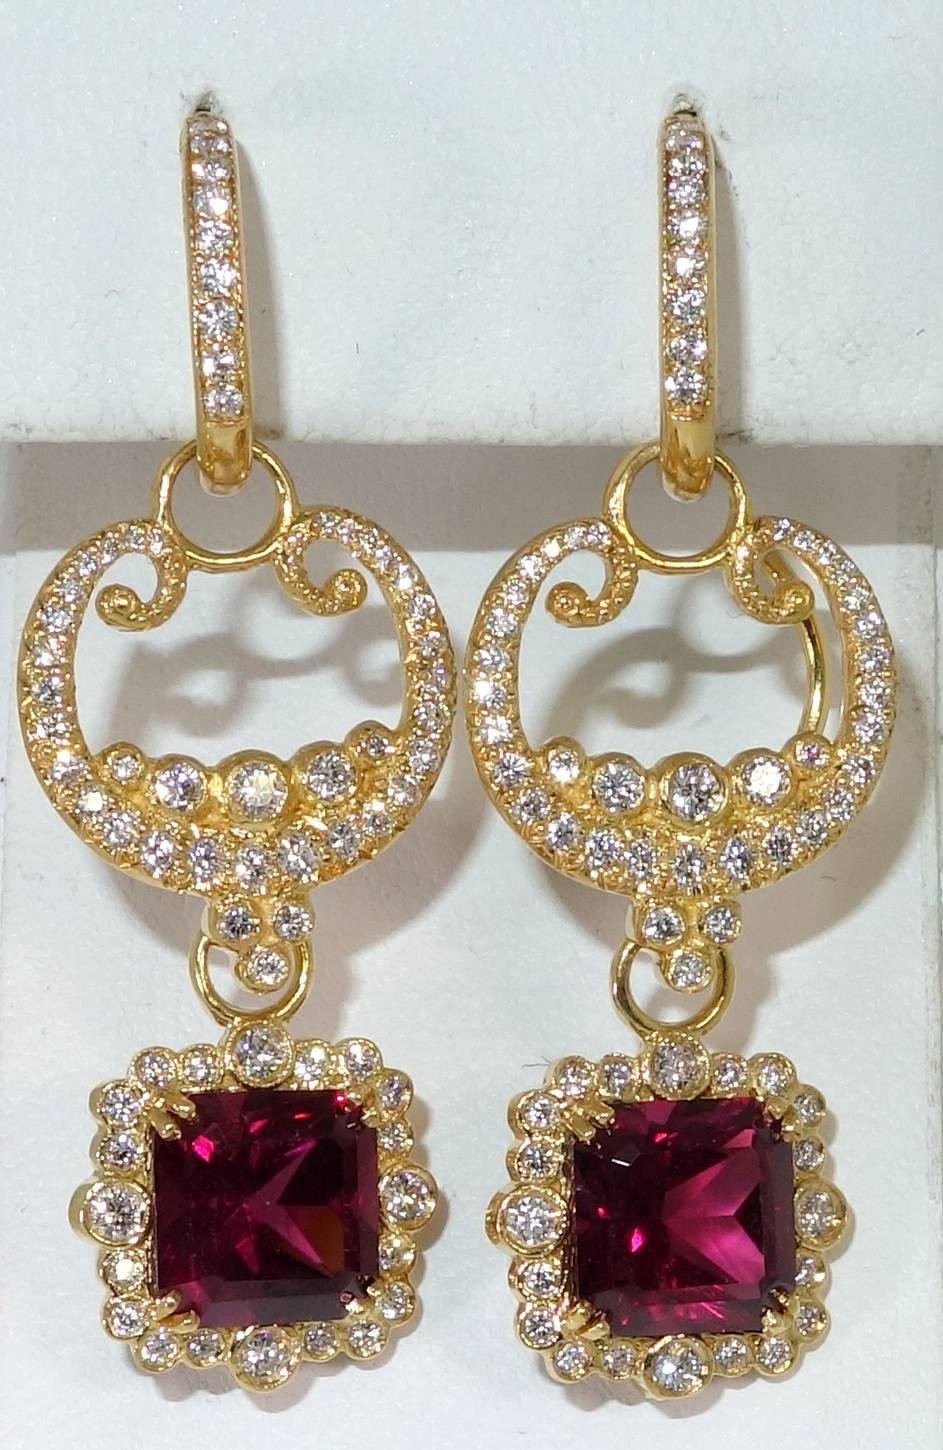 Diamond, pink/red garnets set in 18K gold earrings, they are bright and lively  and can be worn five different ways.  These earrings are hand made, contemporary  and so versatile  The  garnets are clean and bright and well matched.  The color is